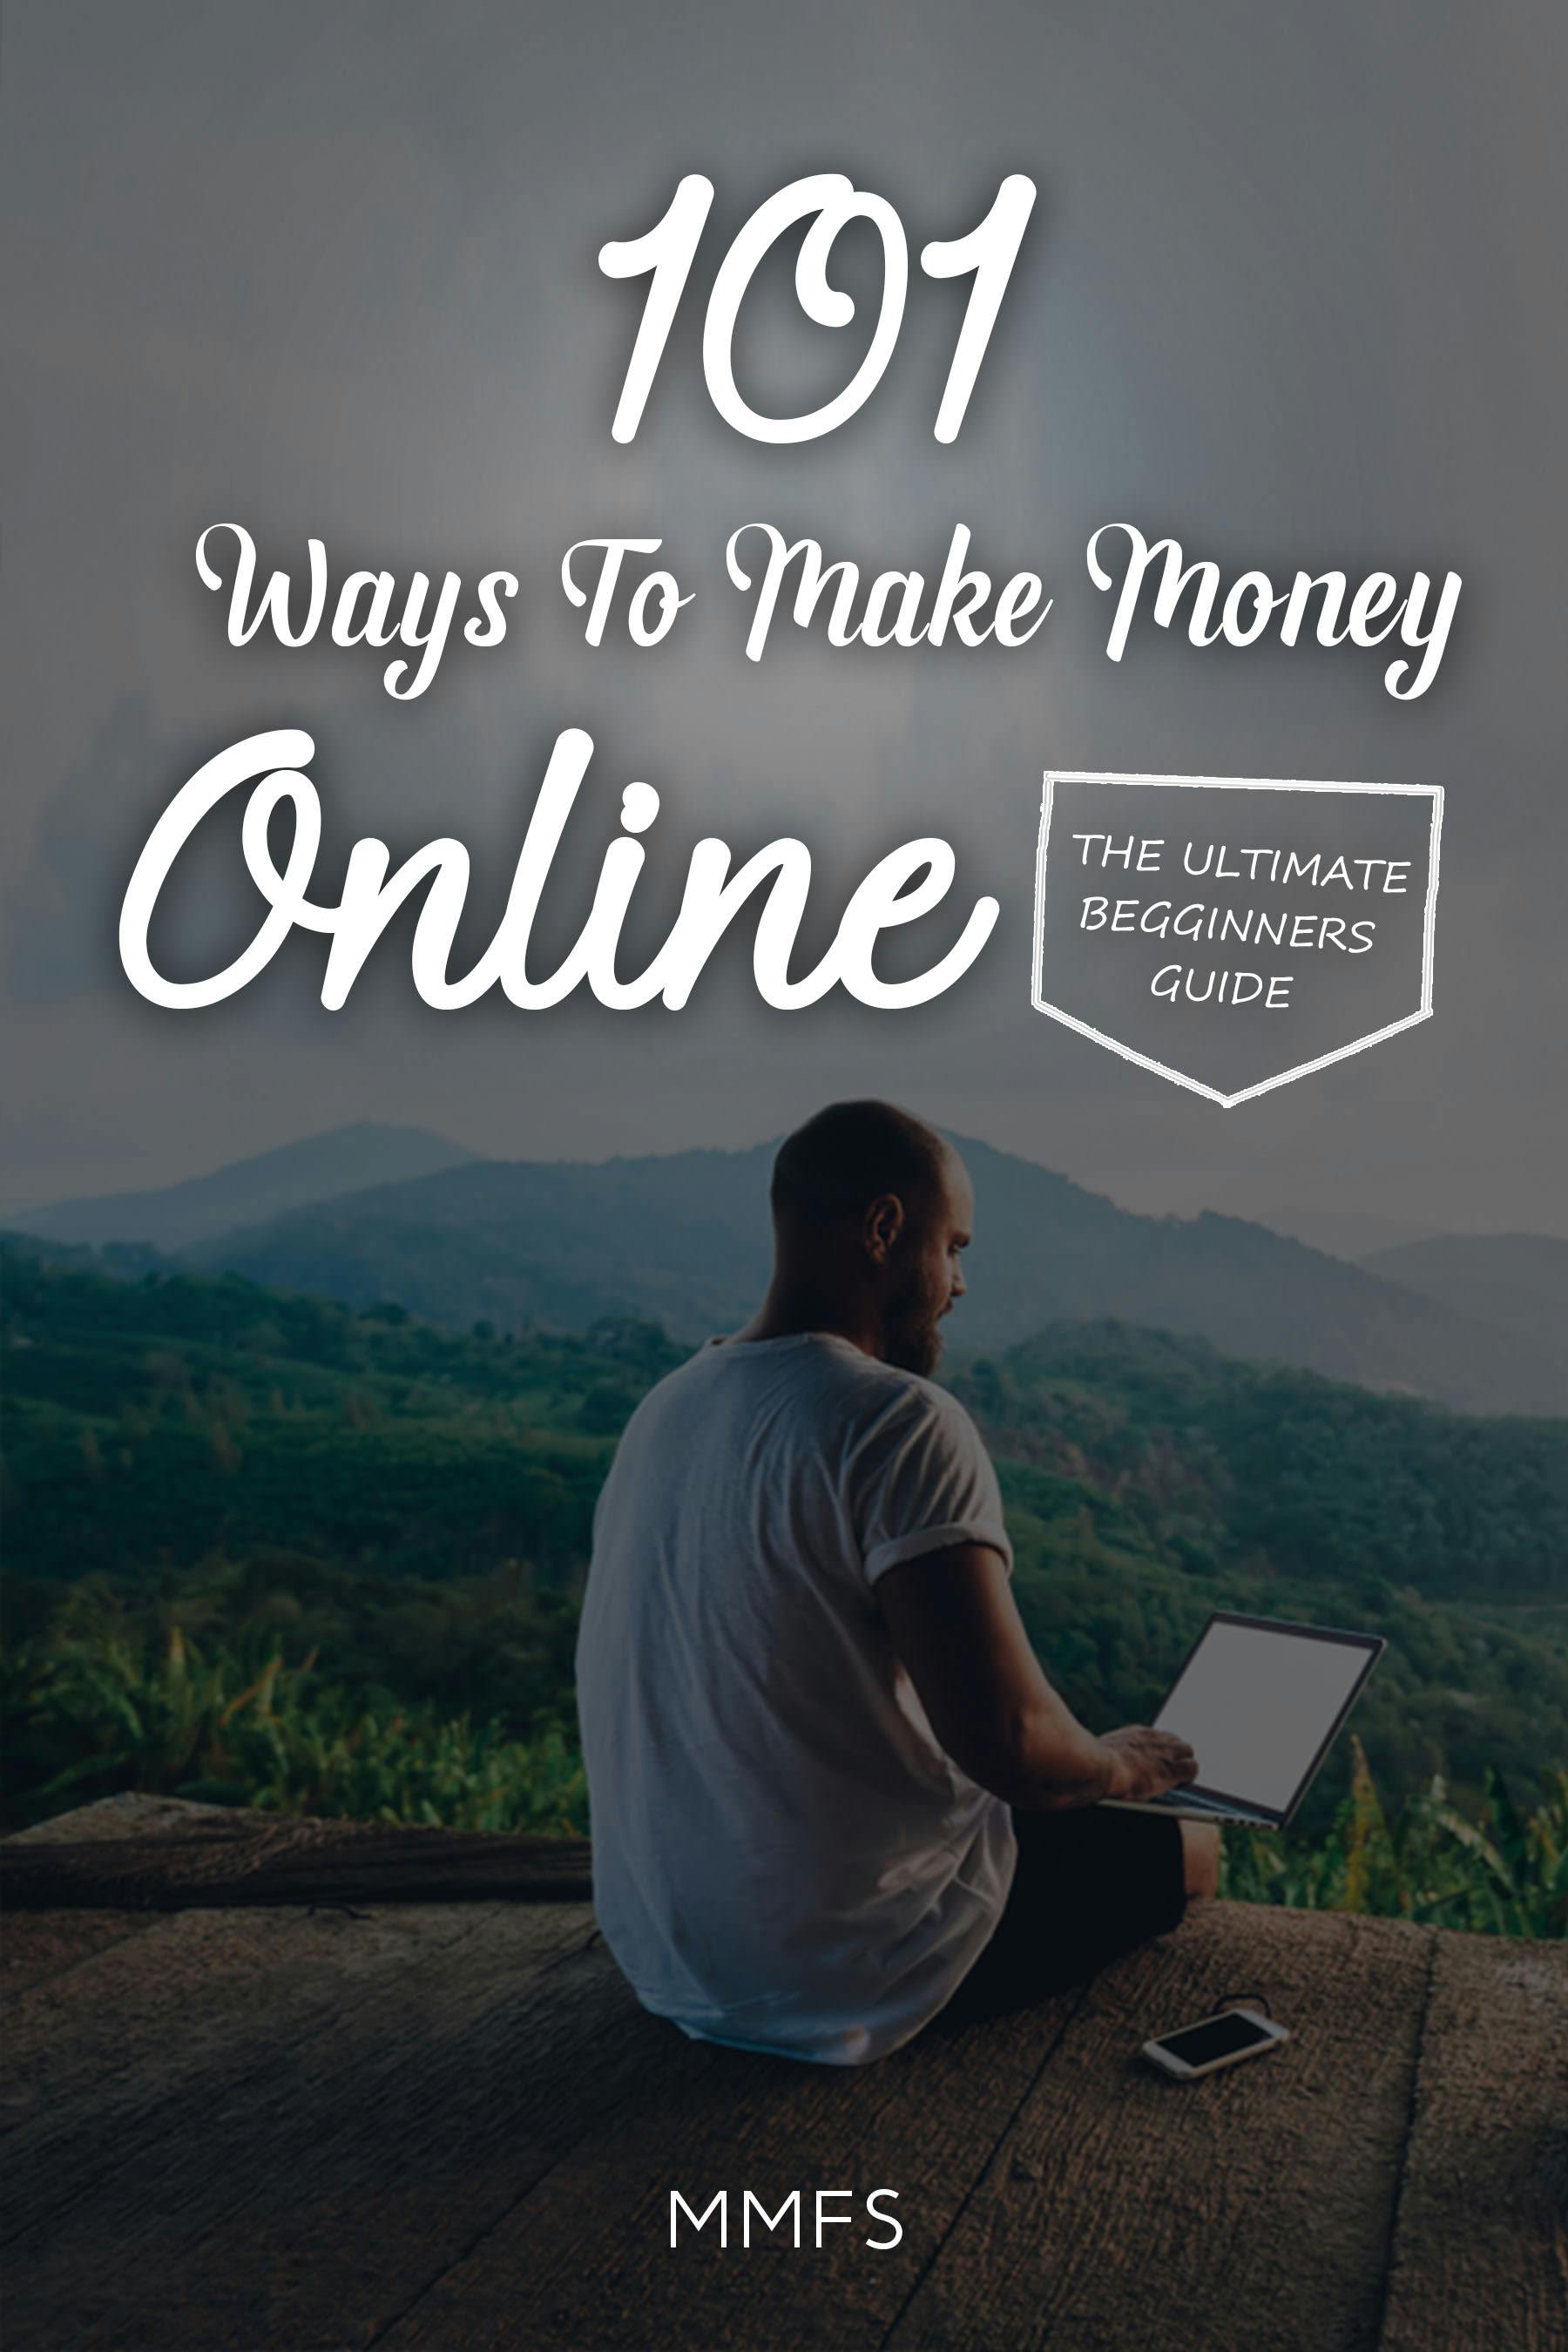 HOW DO YOU MAKE MONEY WITH ONLINE BUSINESS